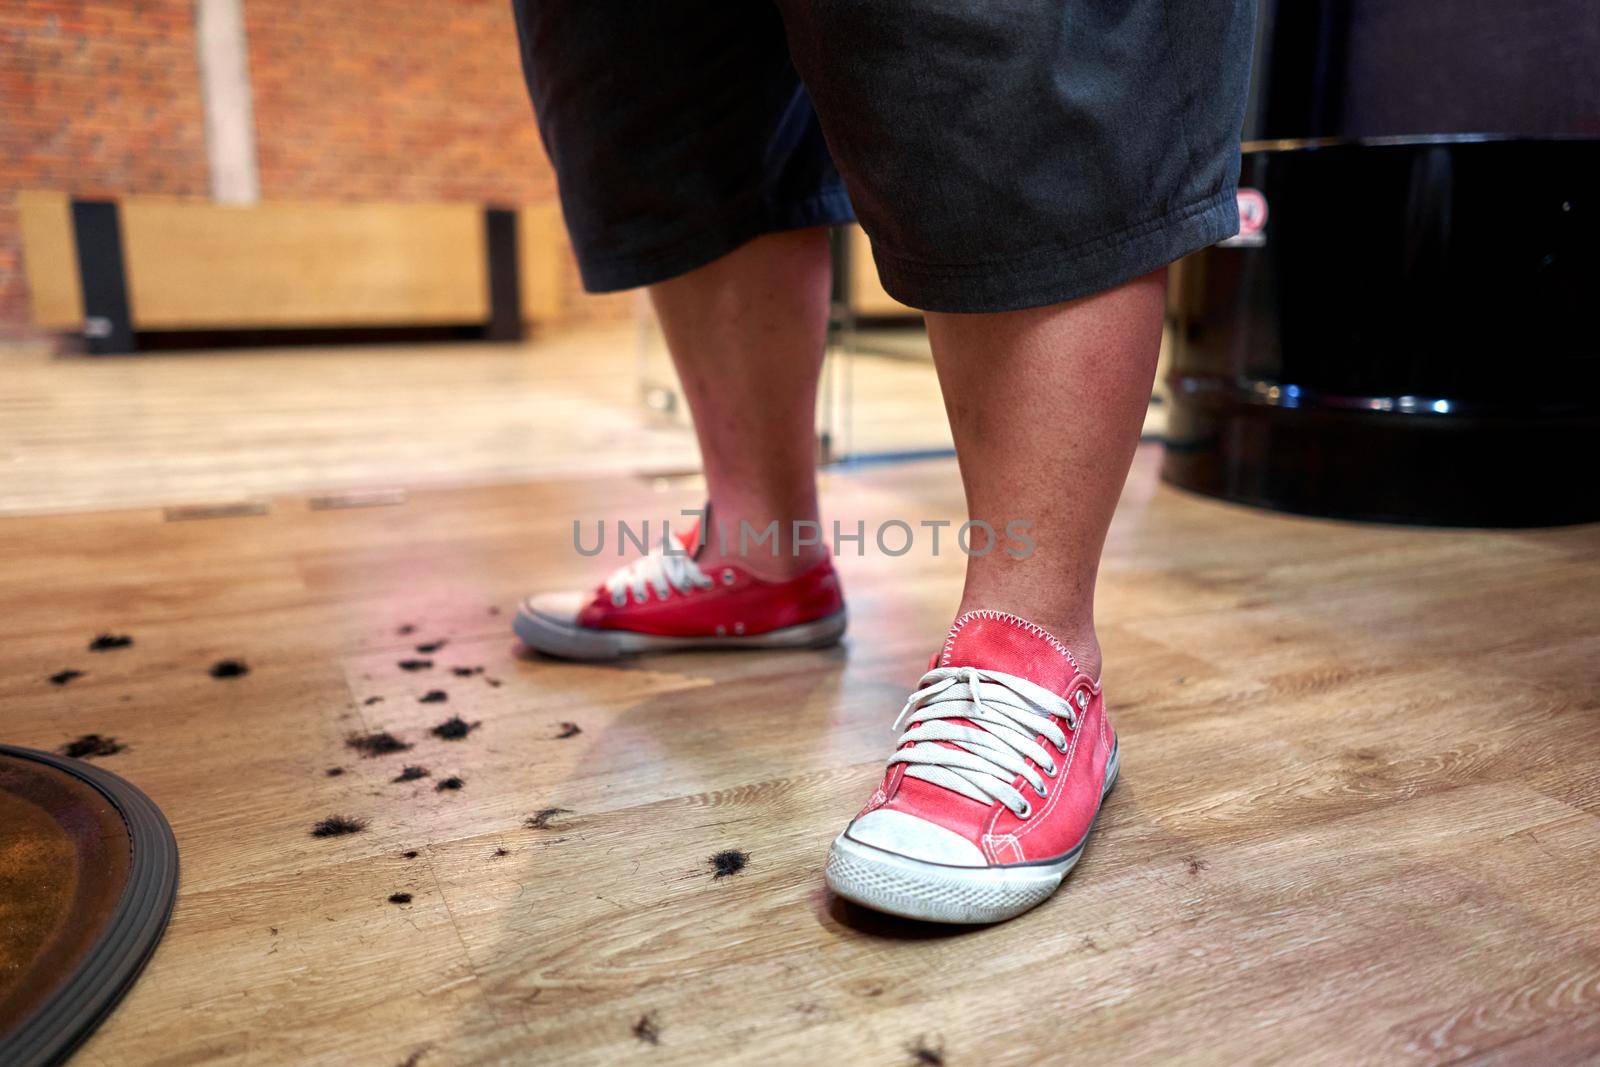 Floor of a barbershop full of hair with the barber standing upright indoors